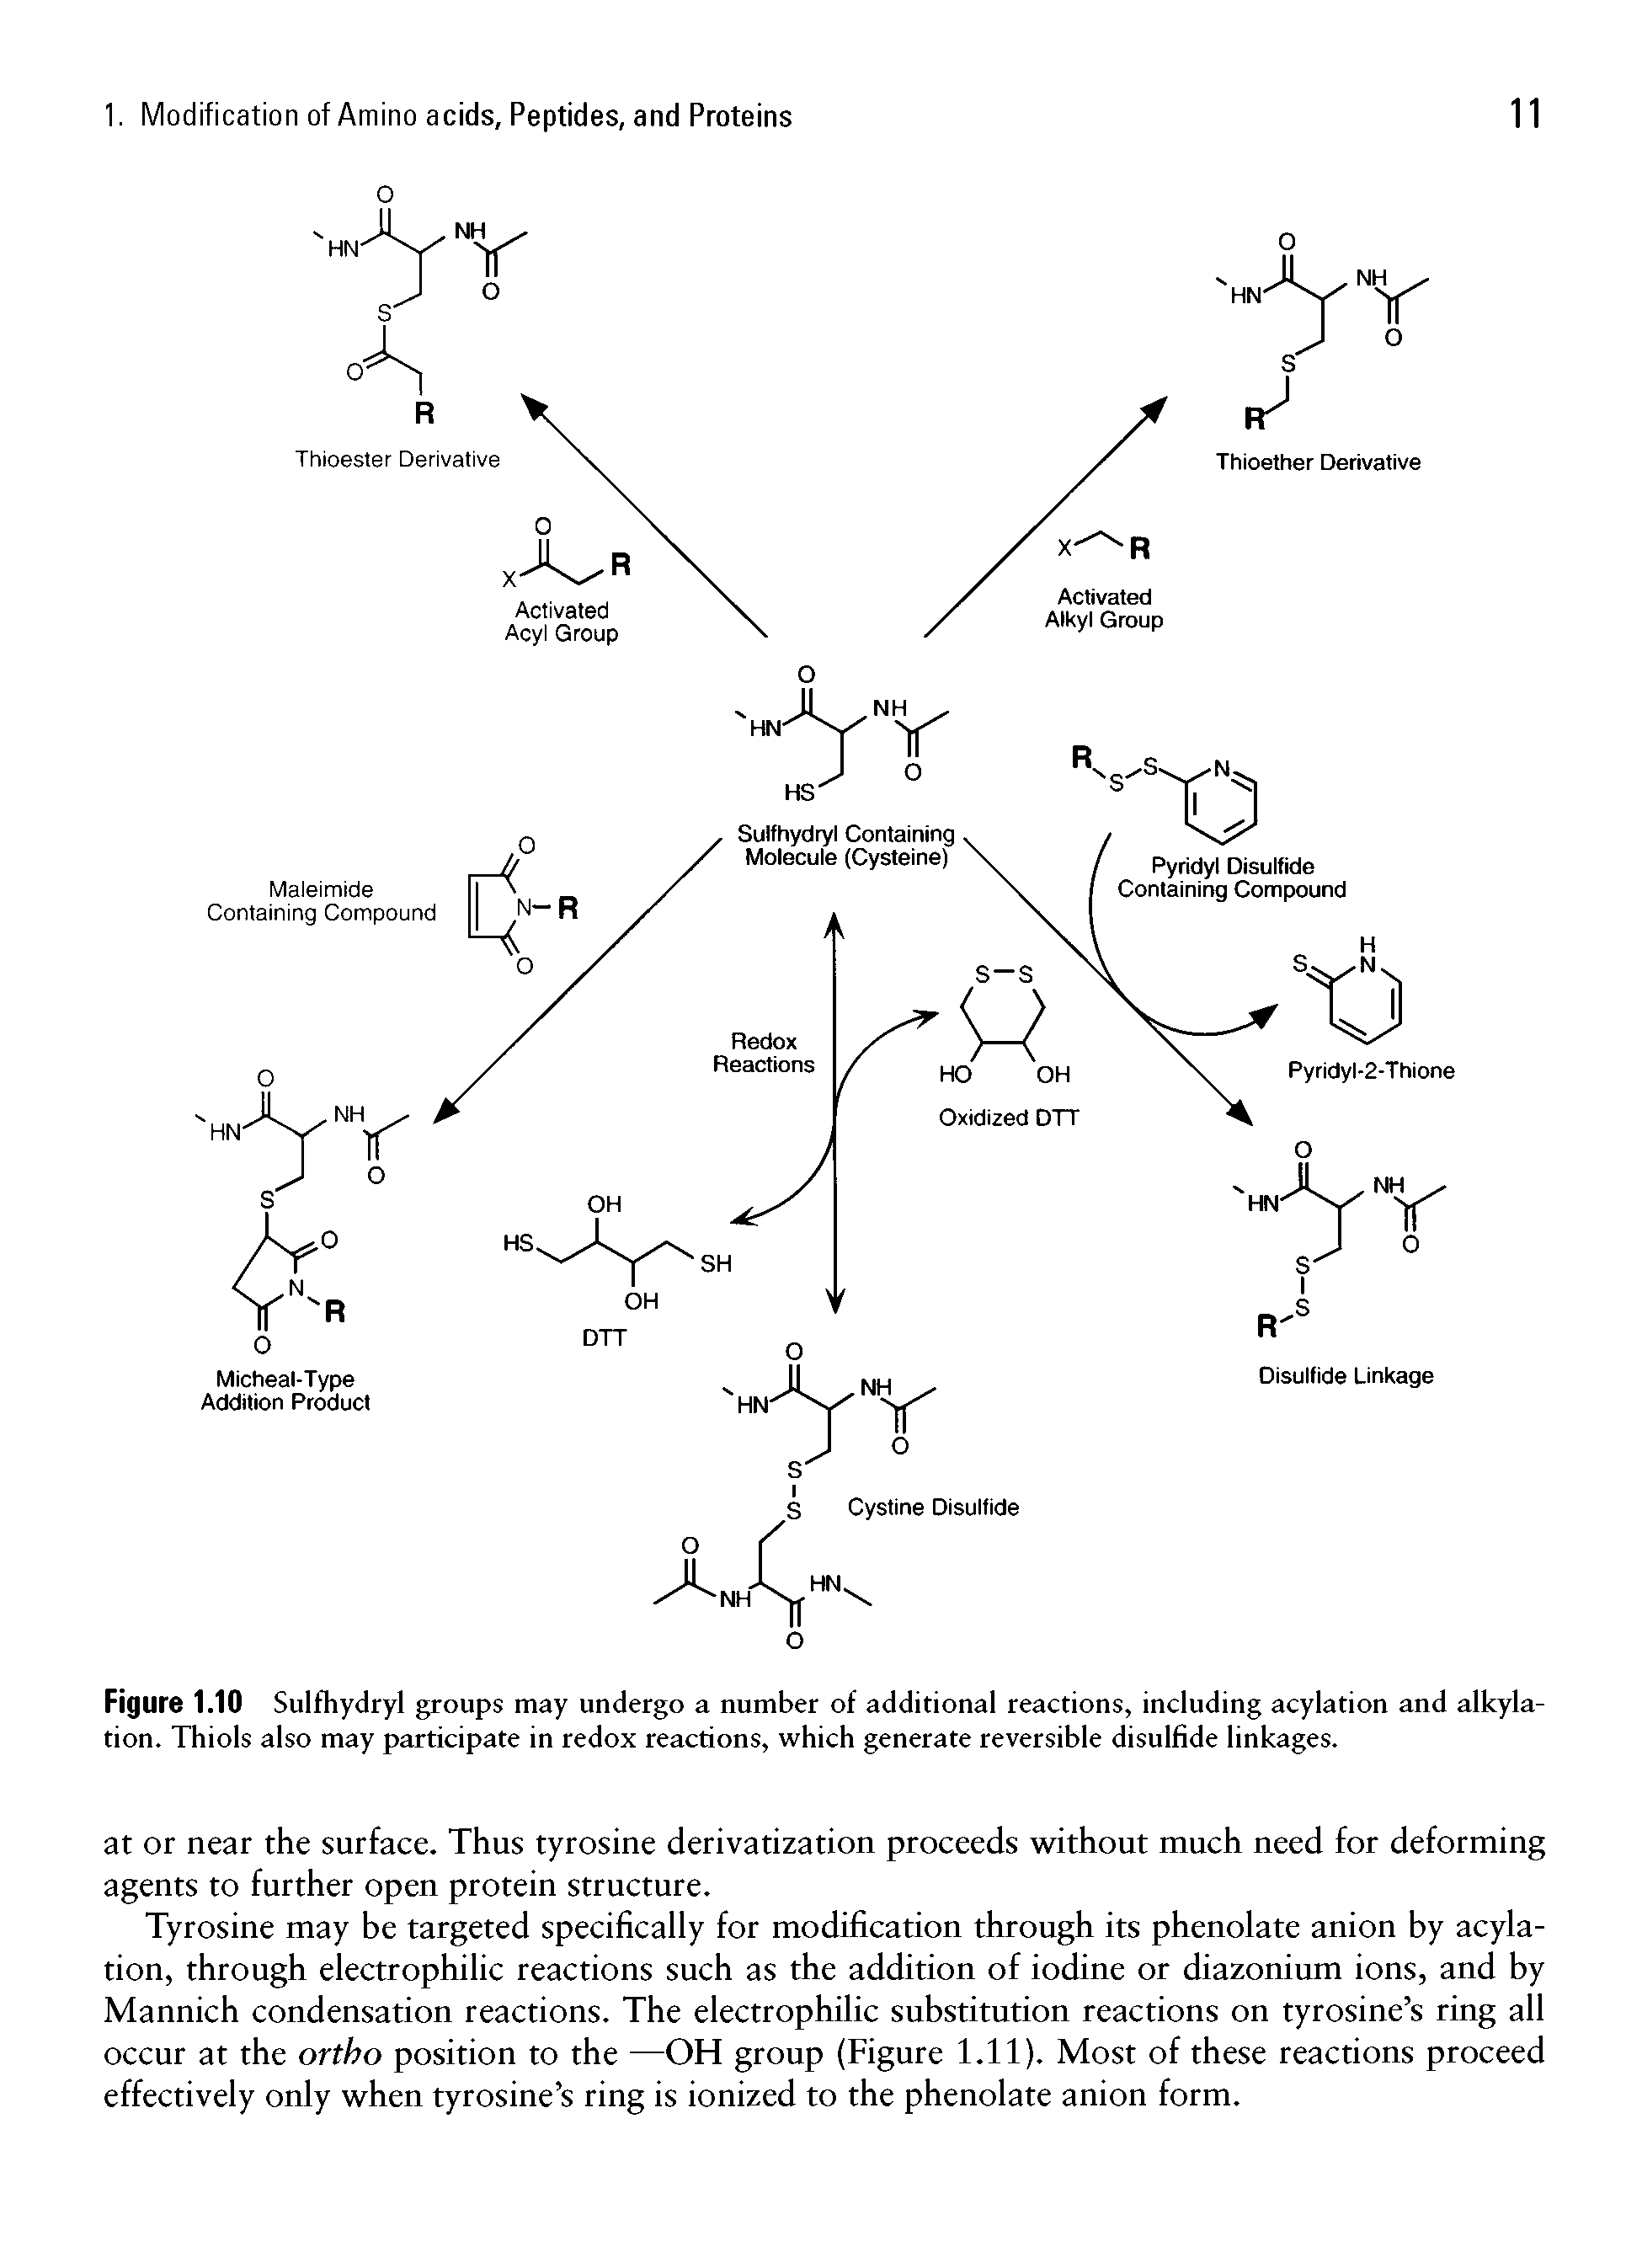 Figure 1.10 Sulfhydryl groups may undergo a number of additional reactions, including acylation and alkylation. Thiols also may participate in redox reactions, which generate reversible disulfide linkages.